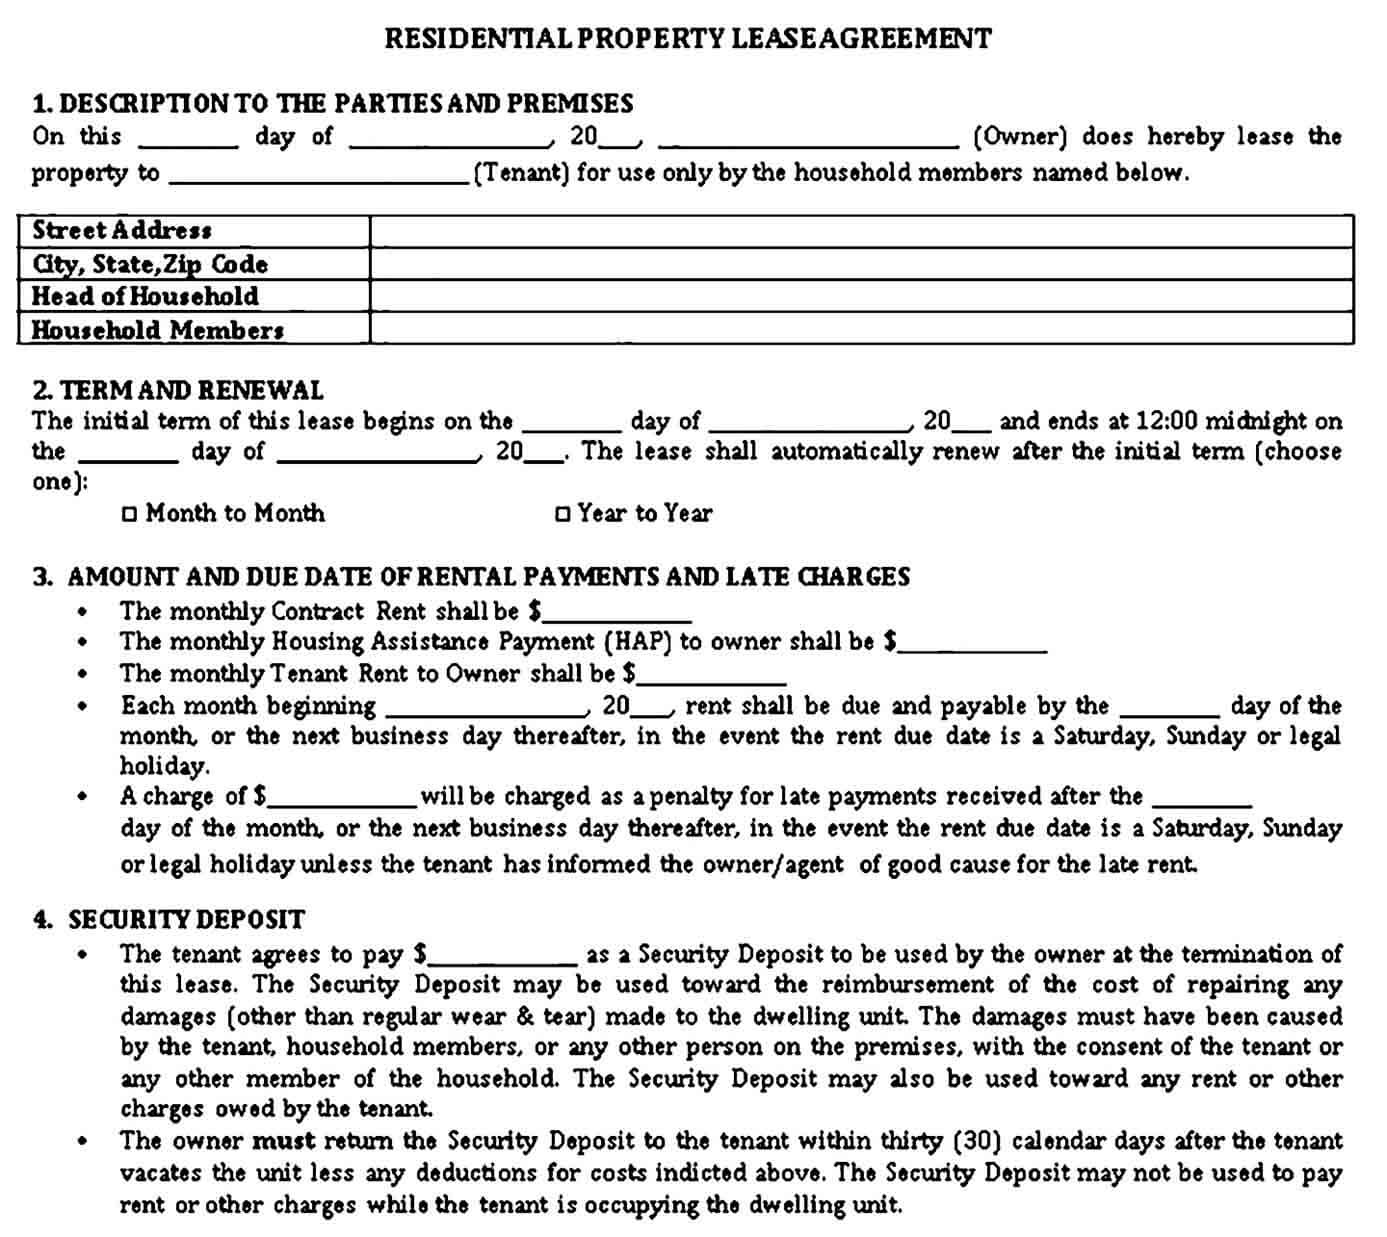 Residential Property Lease Agreement